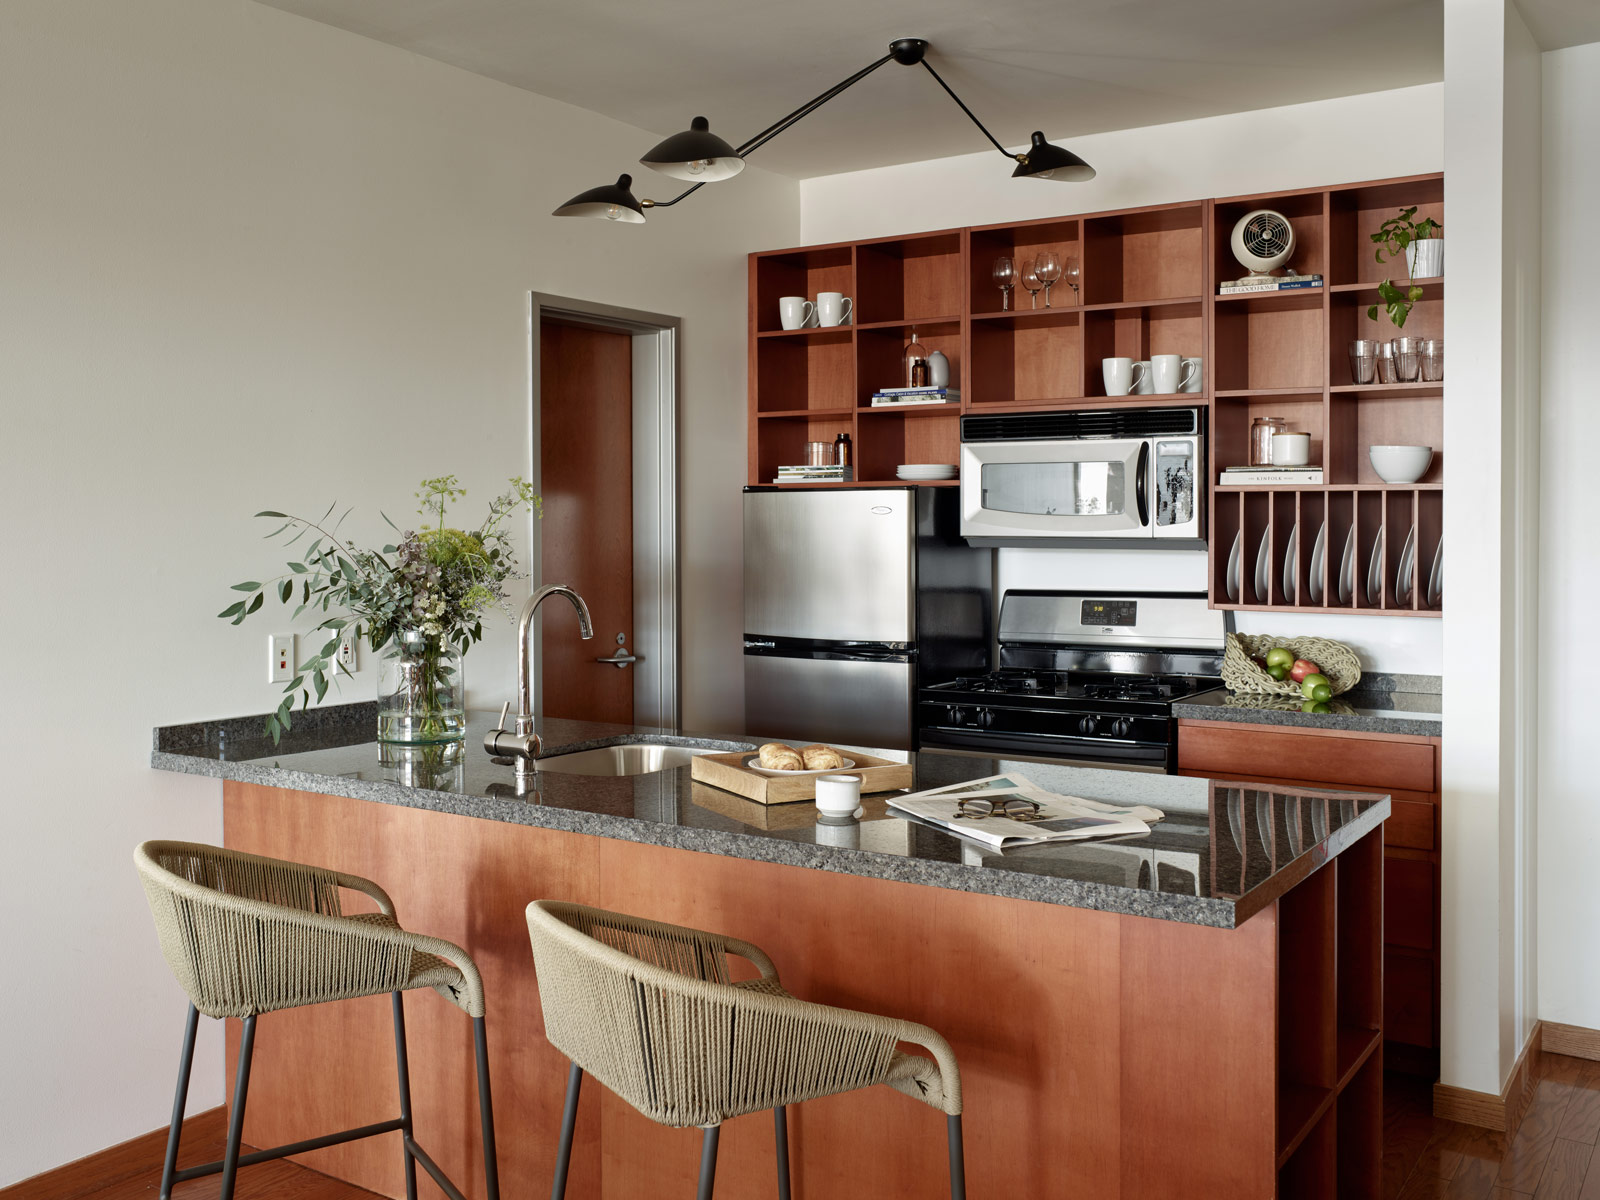 Kitchen with wood cabinets, two barstools and modern light fixture at Marina Grand Resort in New Buffalo, Michigan.